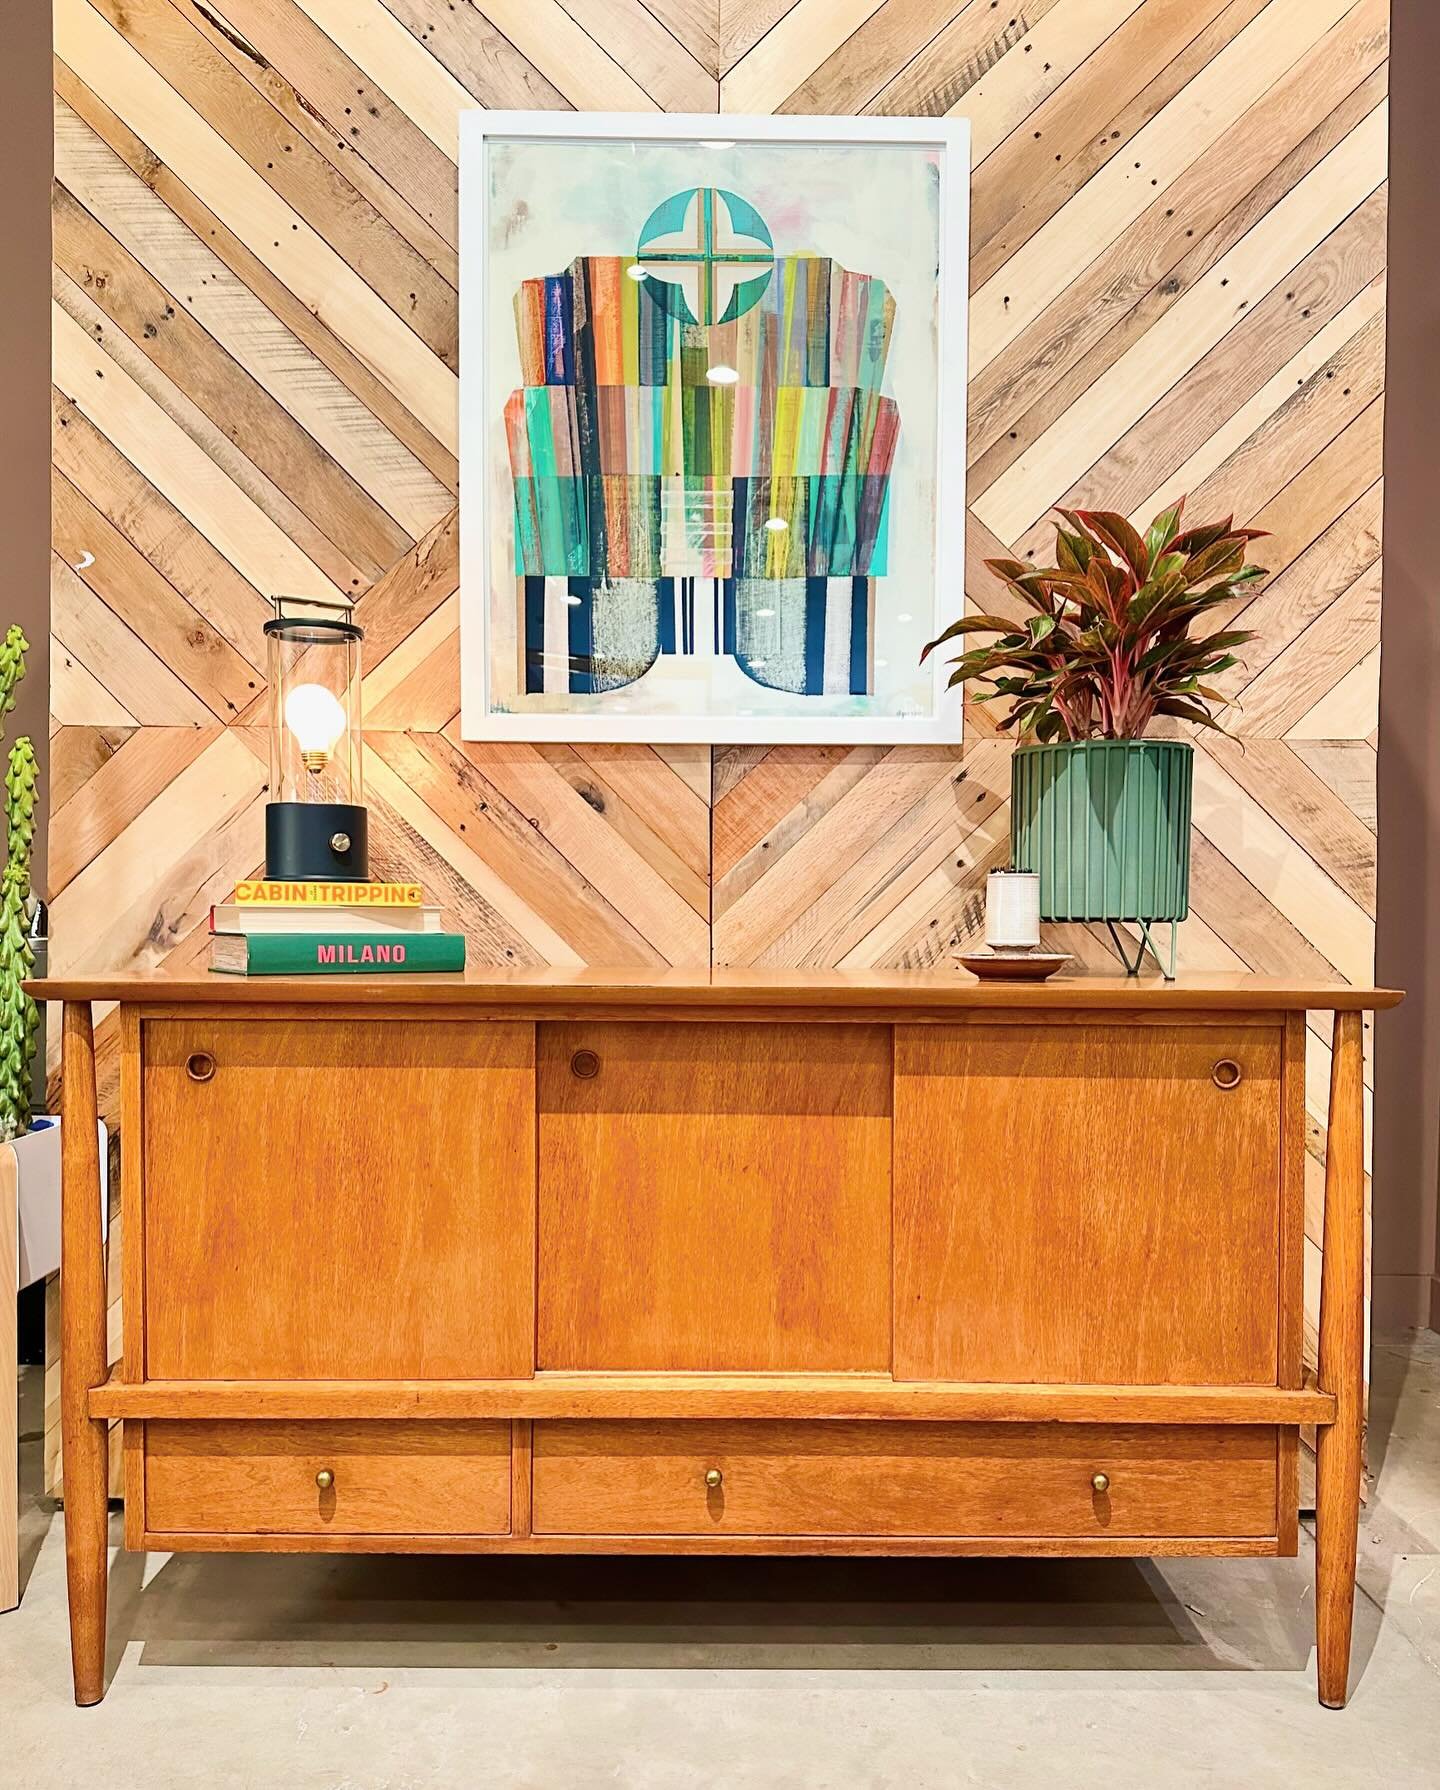 The weekend is here and the store is stocked for you! Stop by to see what&rsquo;s new! Saturday 10a-6p, Sunday 10a-5p

#districtchicago #midcenturyfurniture #freshenupyourspace #alysonkhan #shoplocal